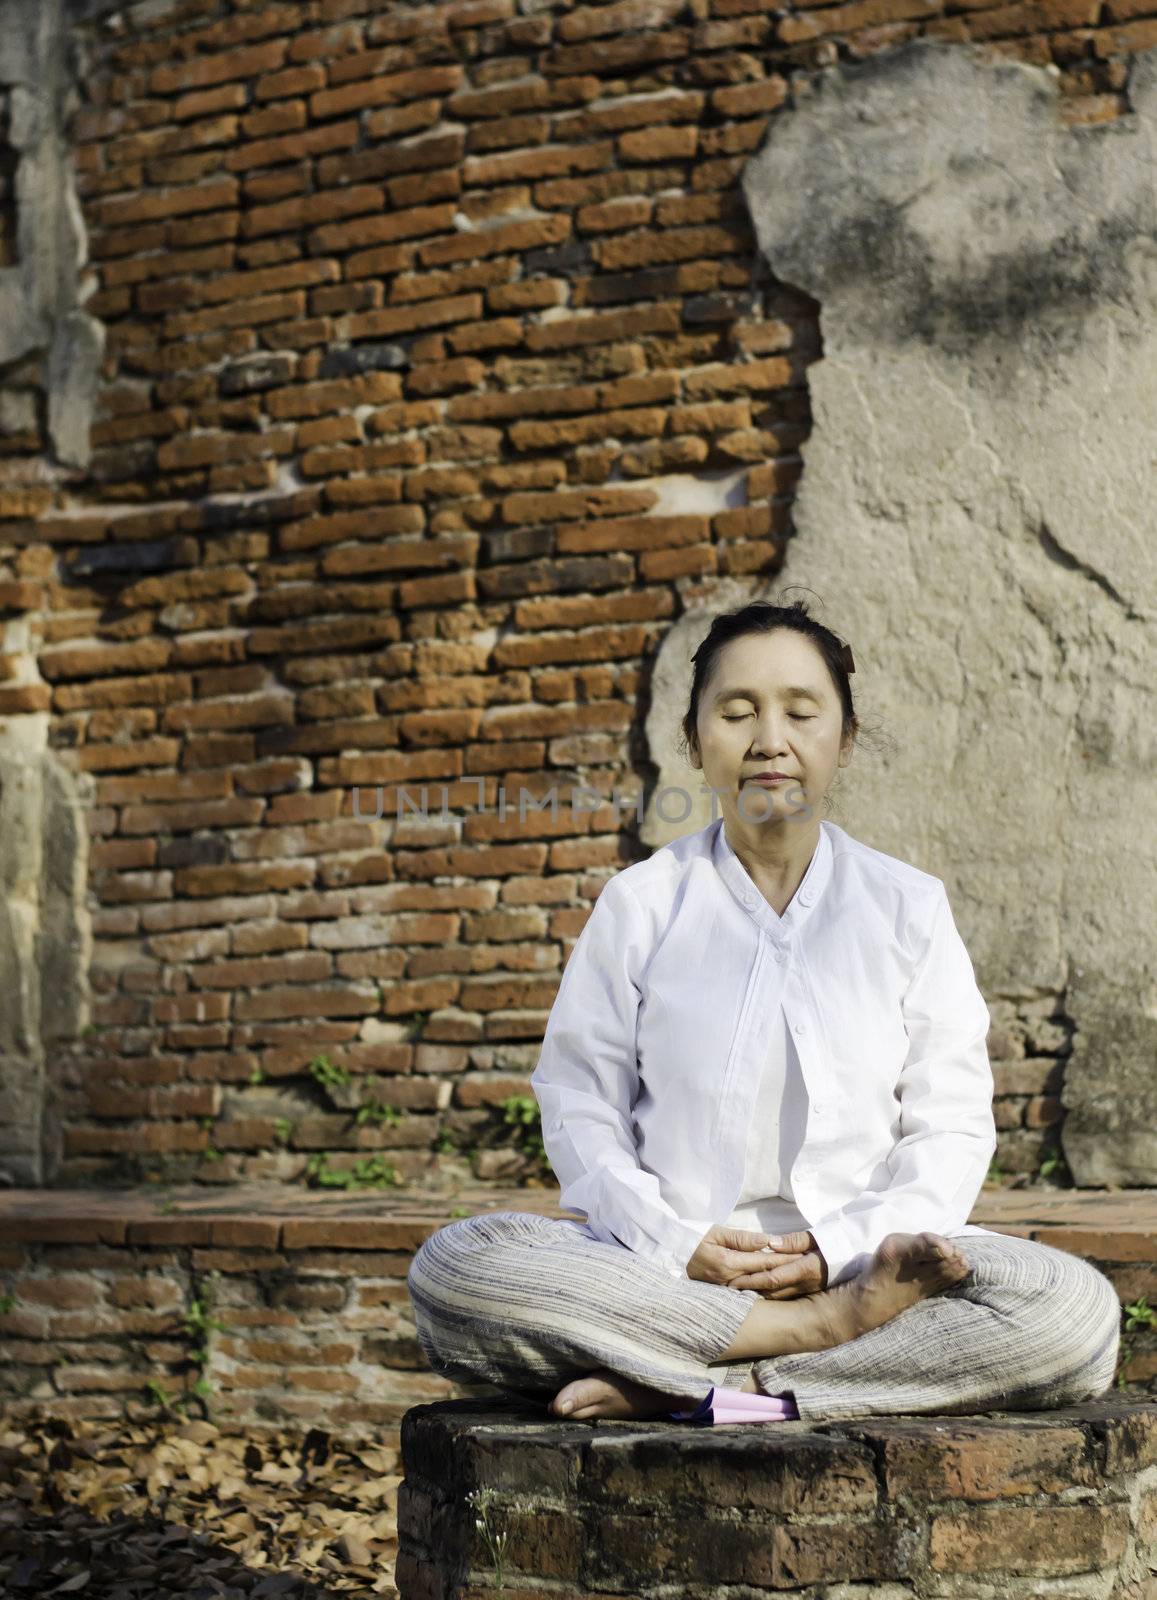 Buddhist woman meditating against ancient temple